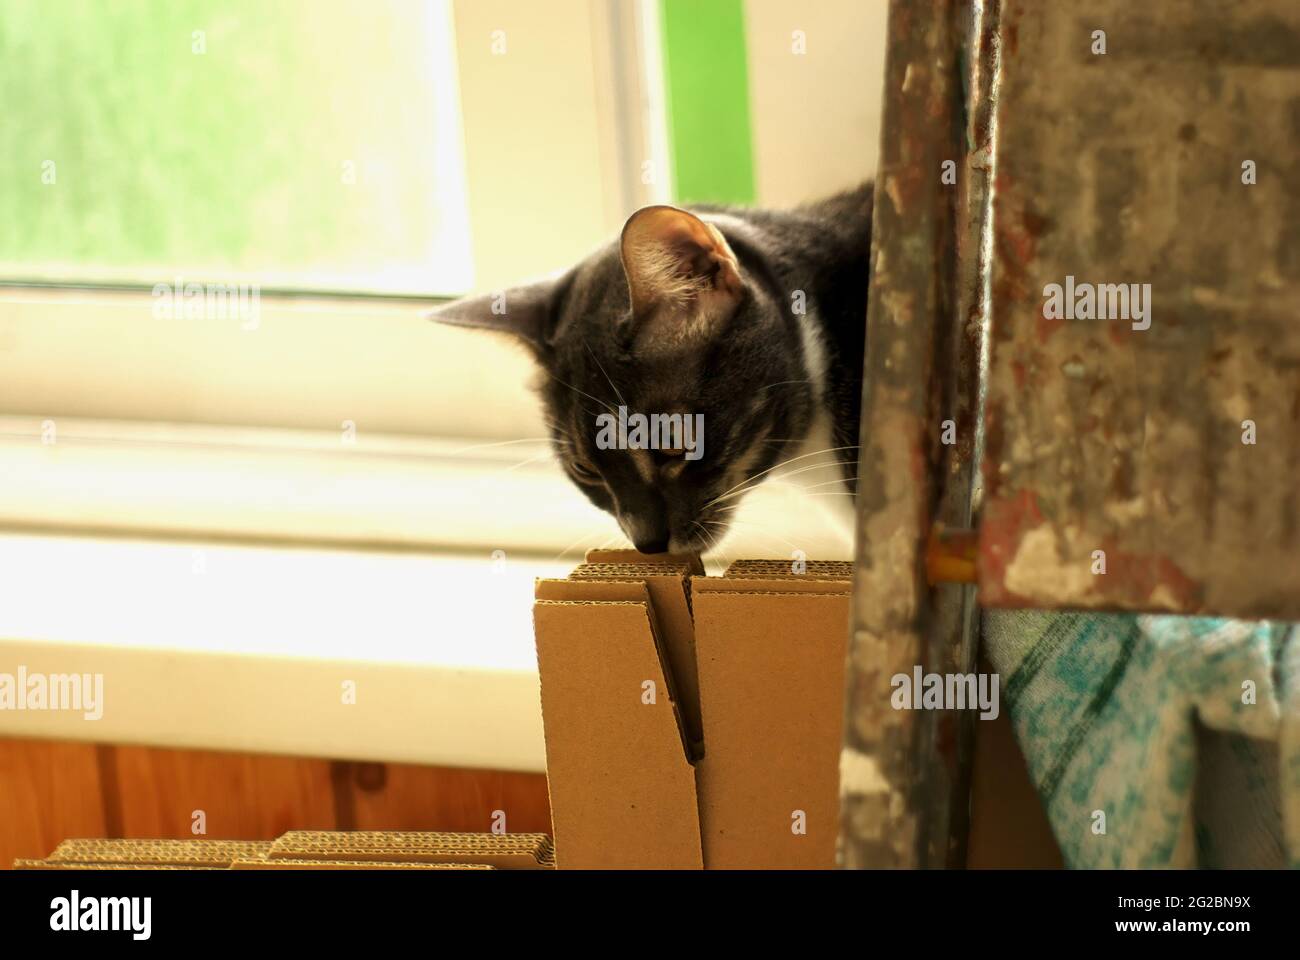 a cat sits behind a folding ladder, against the background of a window Stock Photo